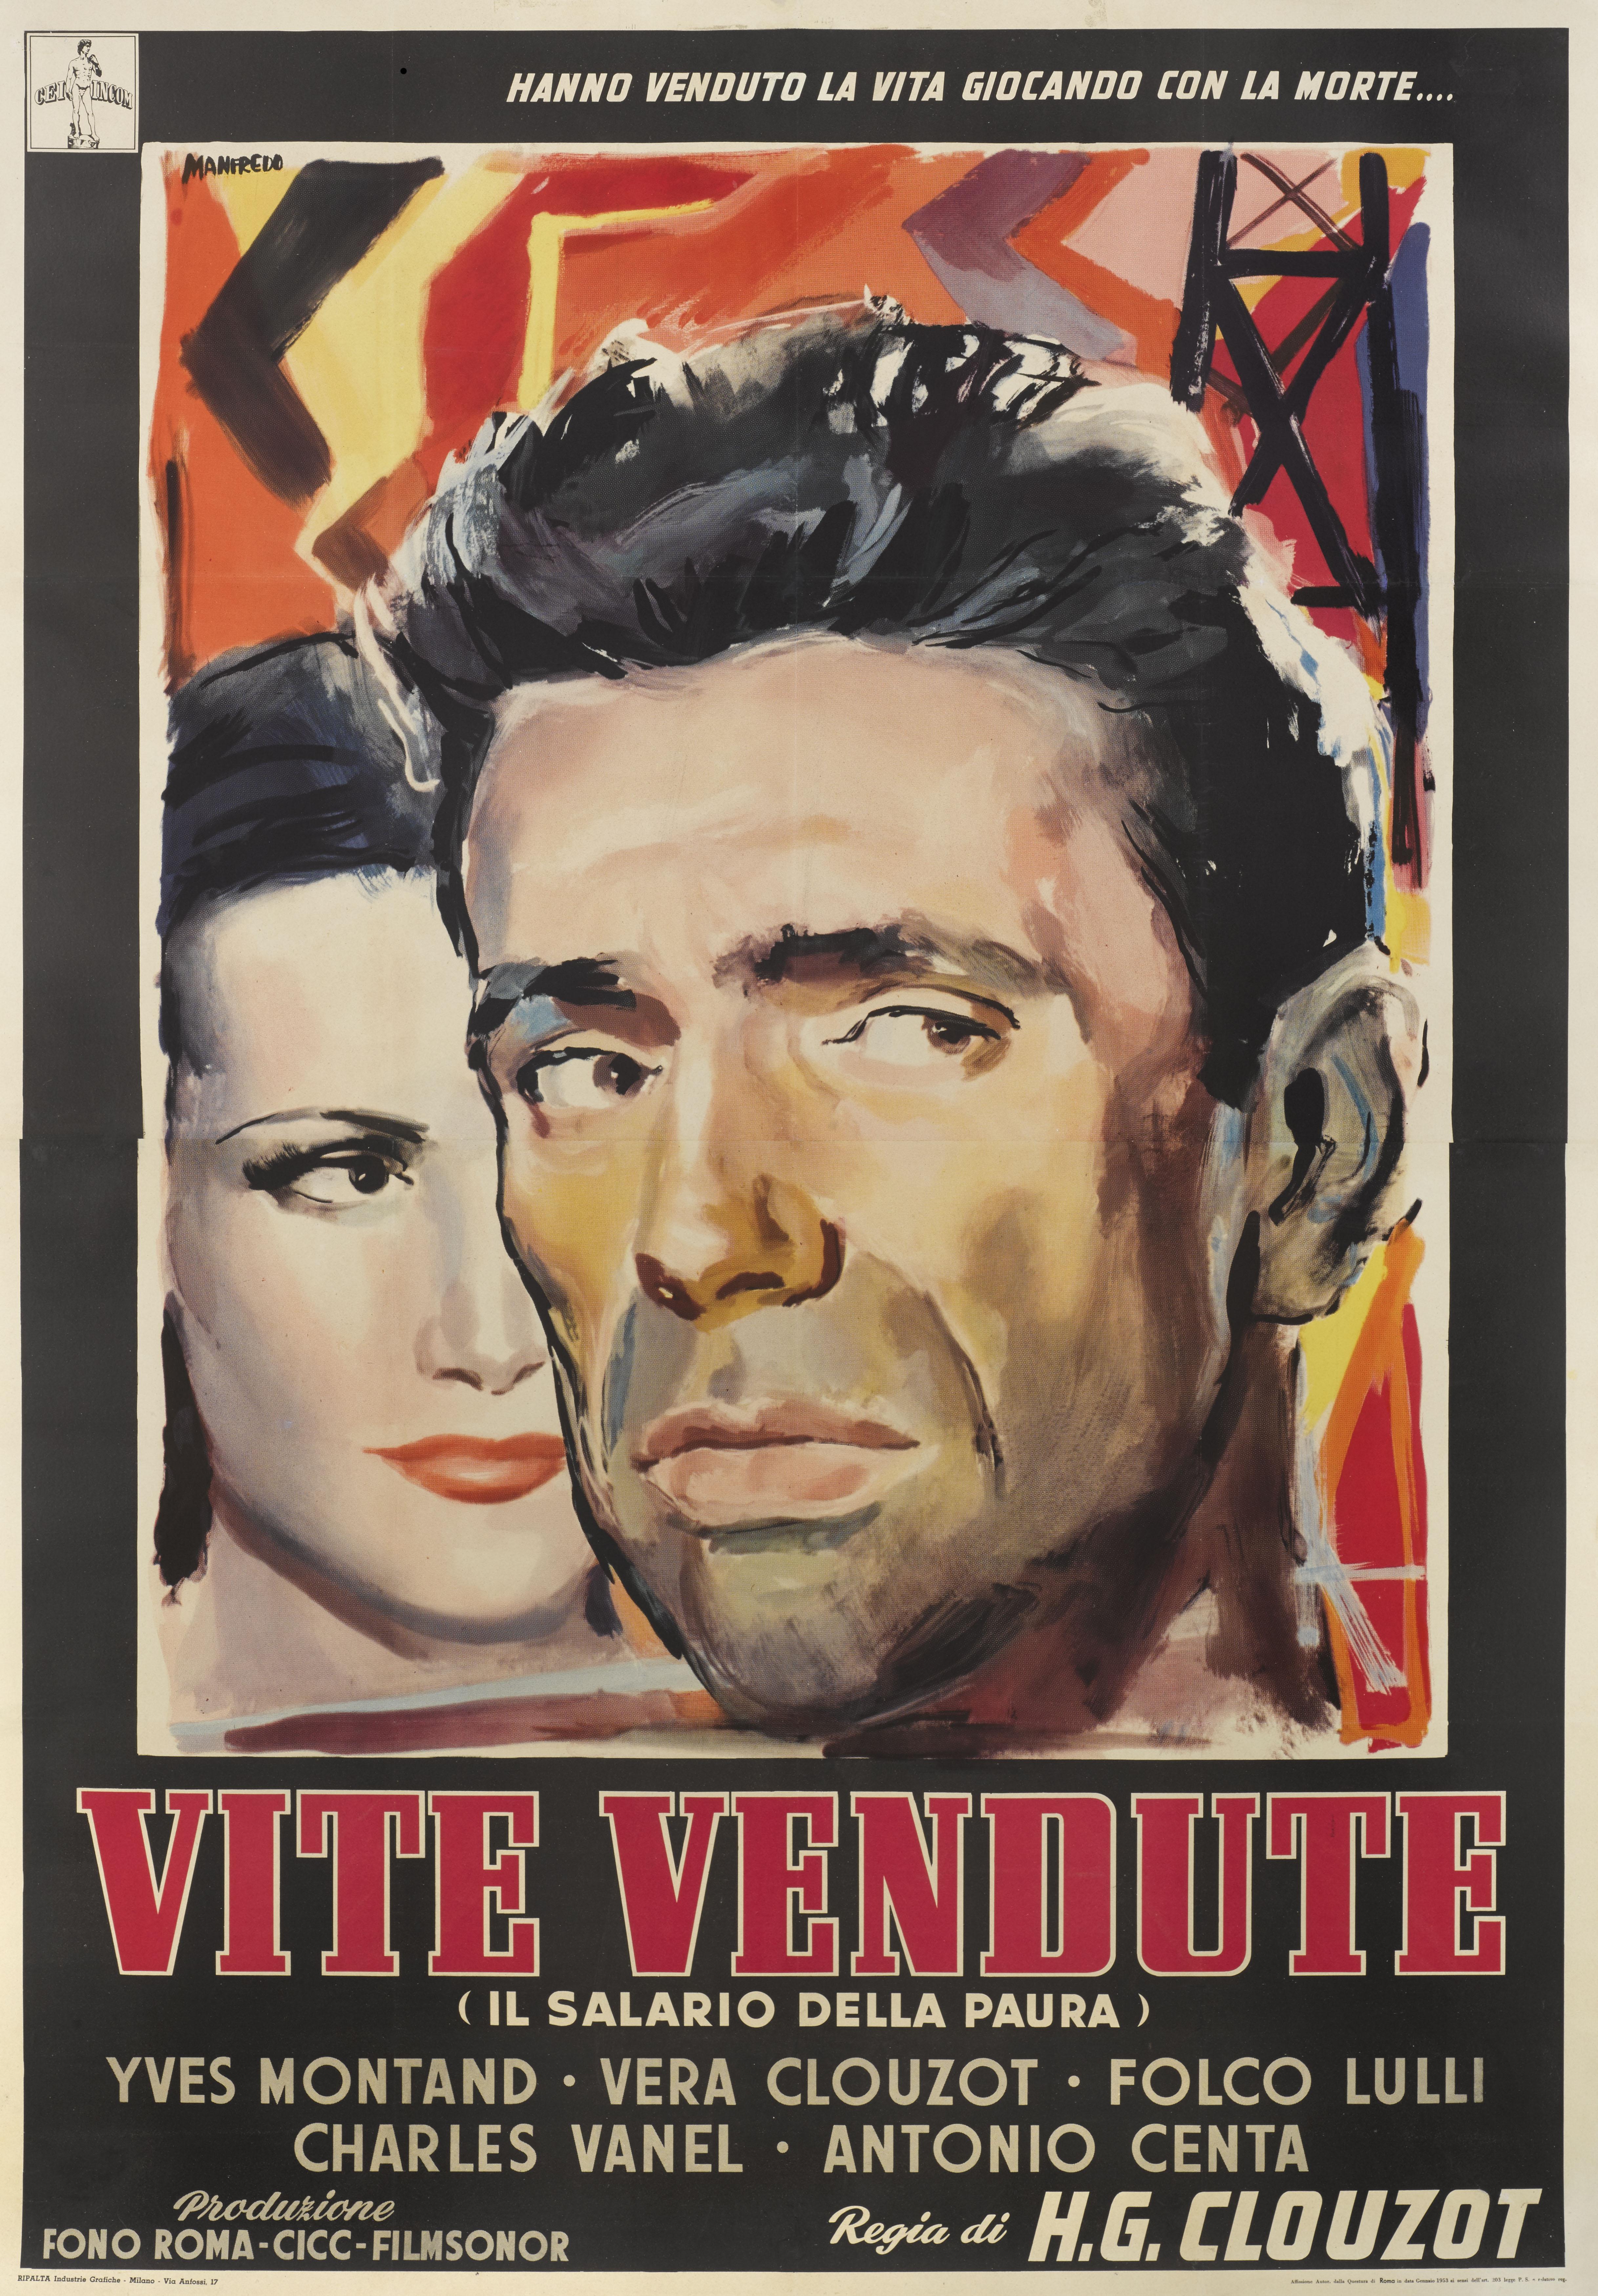 Original Italian film poster for the 1953 adventure thriller film Le Salaire de la Peur / The Wages of Fear.
This film was directed by Henri-Georges Clouzot. Yves Montand, Charles Vanel. 
The artwork on this poster is by Manfredo Acerbo